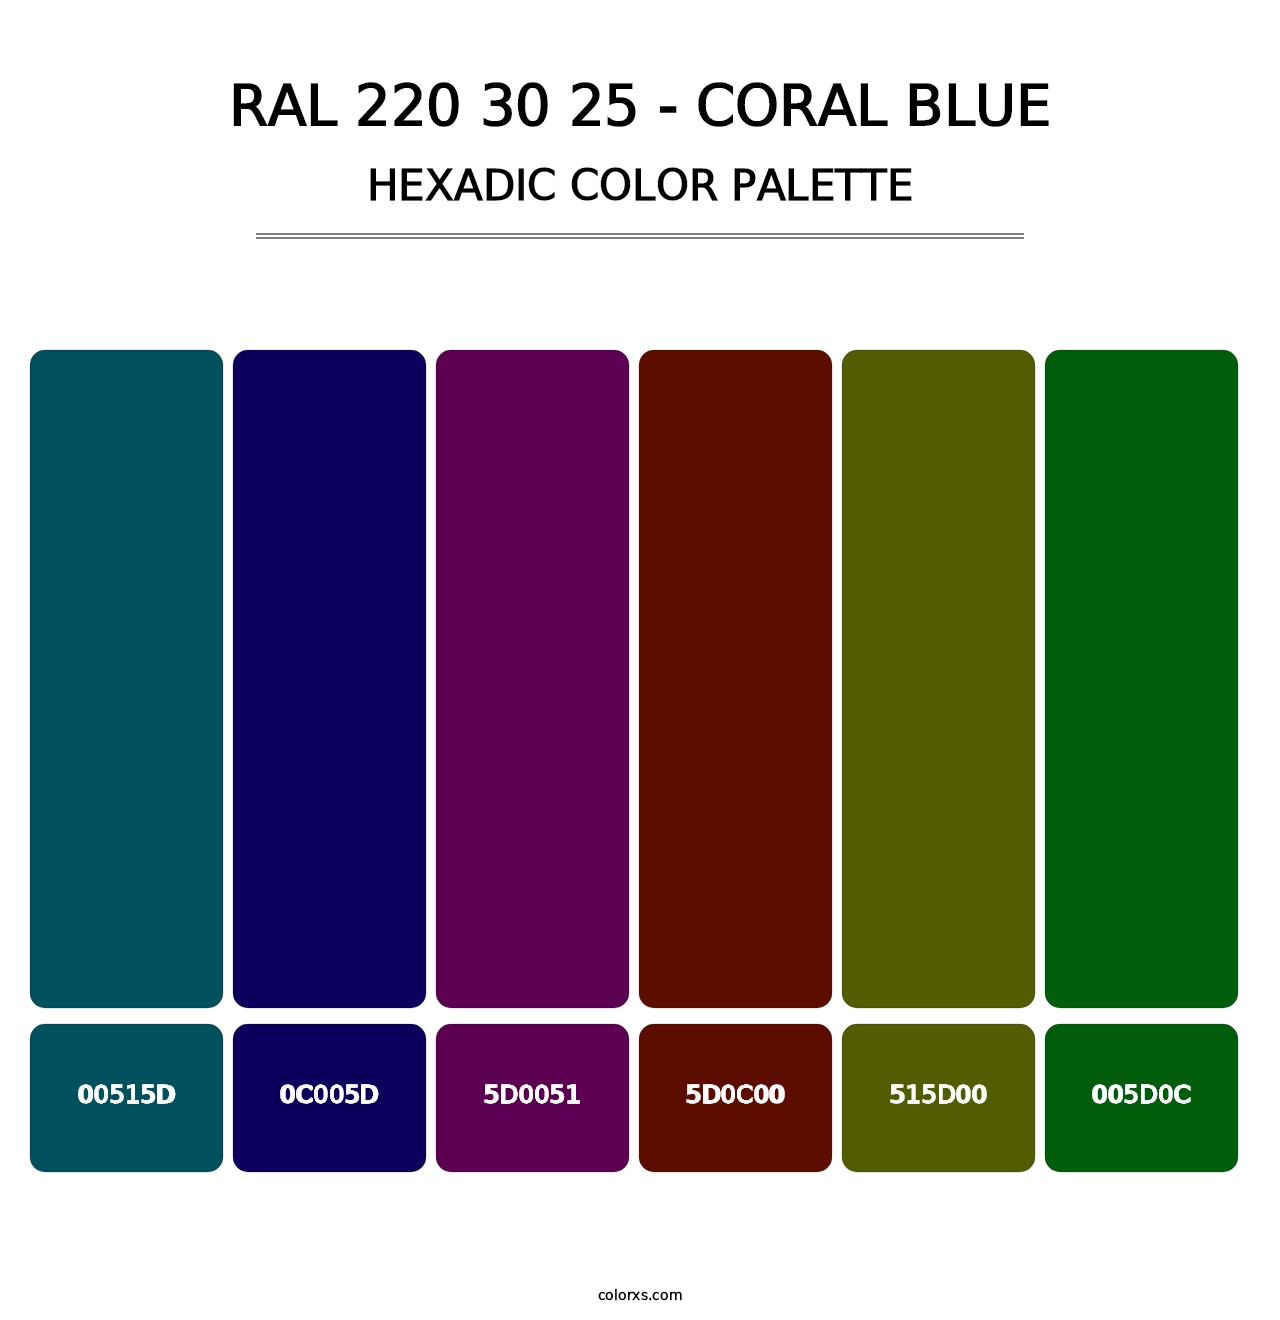 RAL 220 30 25 - Coral Blue - Hexadic Color Palette